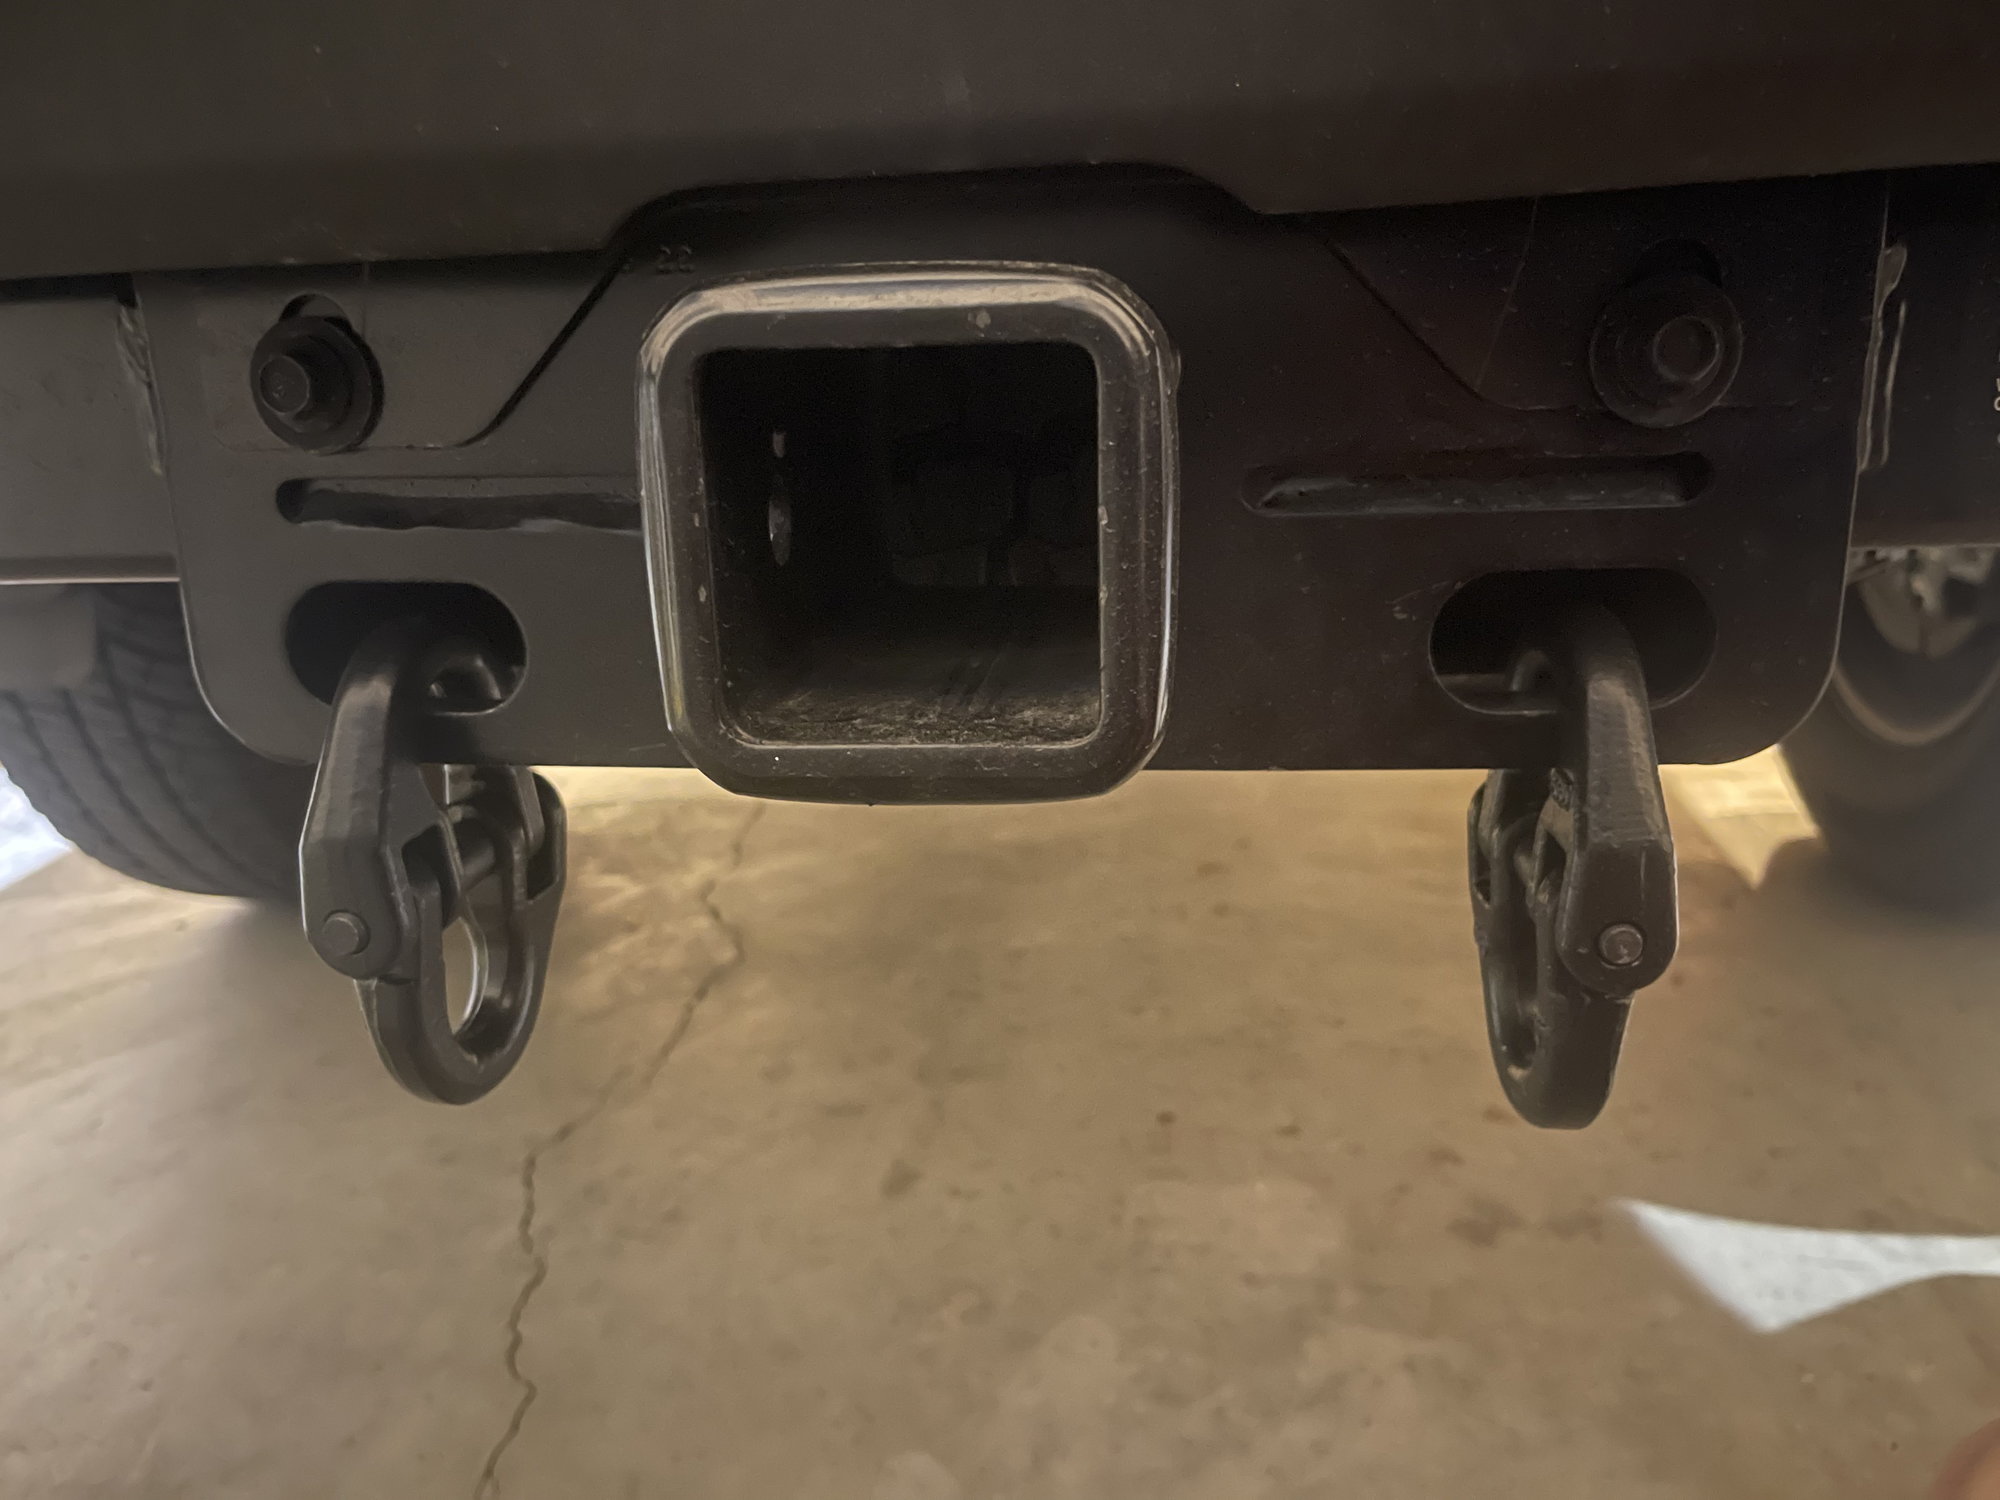 Trailer safety/chain hook woes - Page 3 - Ford Truck Enthusiasts Forums